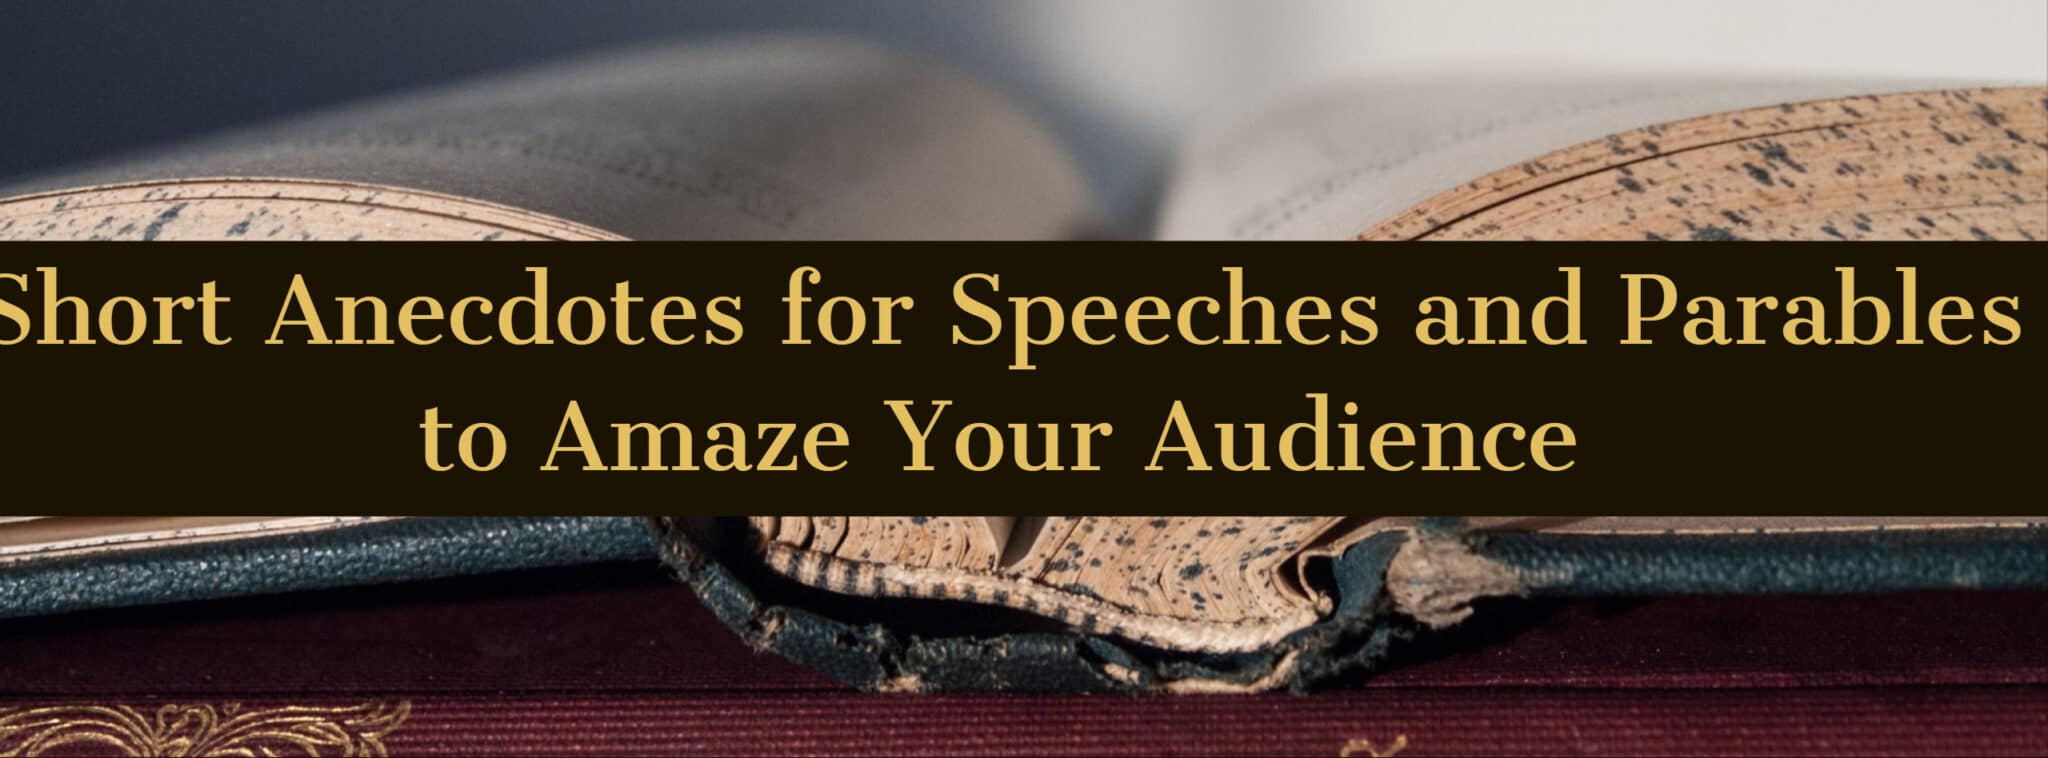 Short Anecdotes for Speeches and Parables to Amaze Your Audience